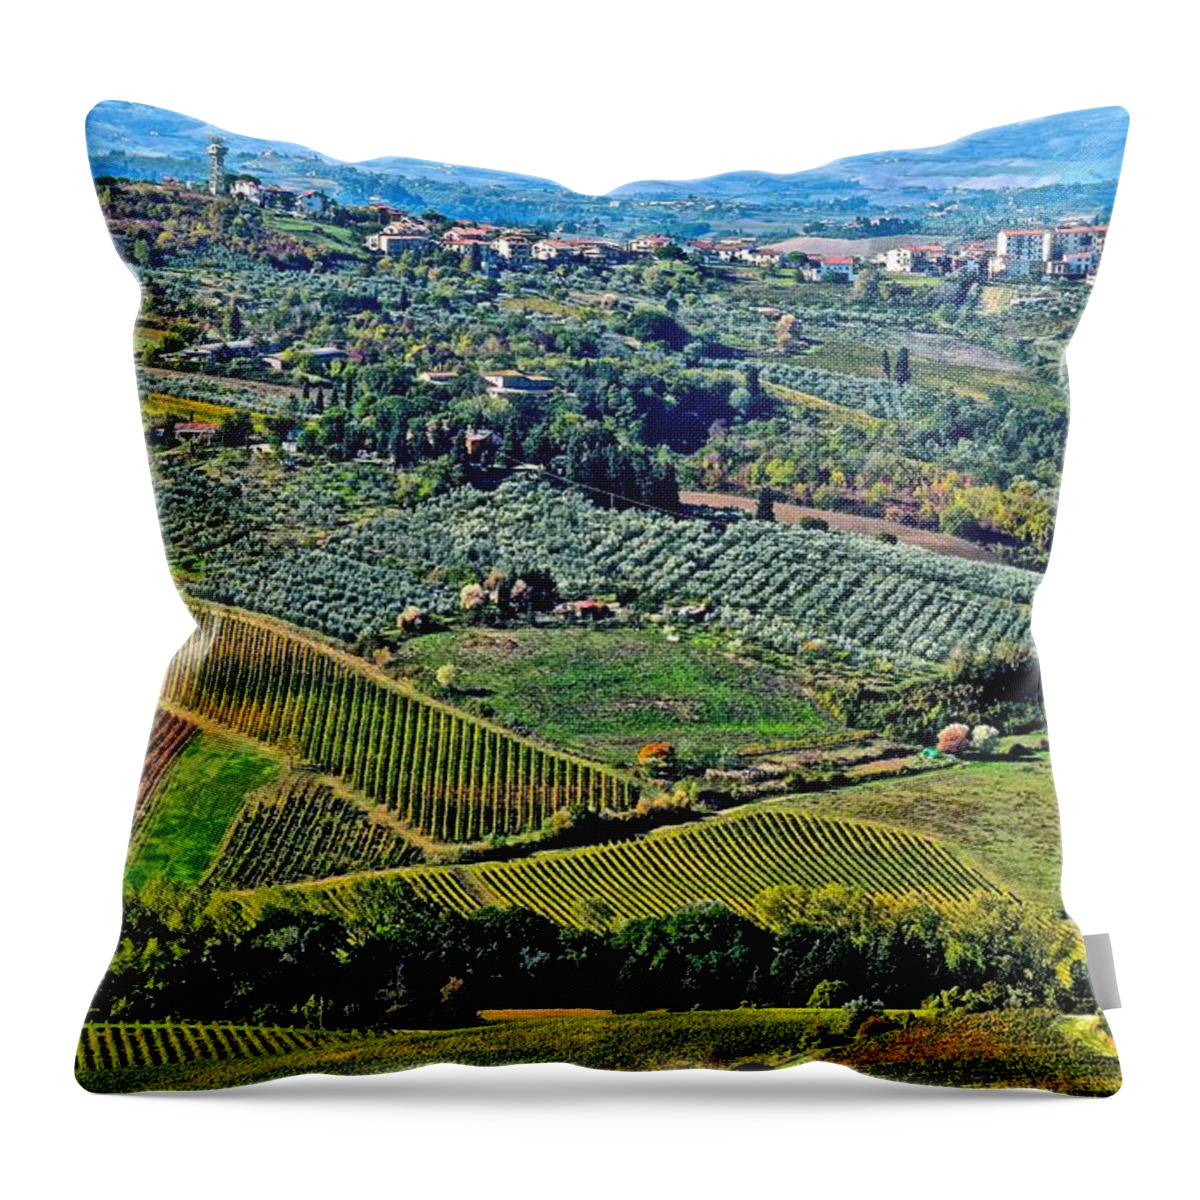 Tuscany Throw Pillow featuring the photograph Tuscan Landscape by Frozen in Time Fine Art Photography